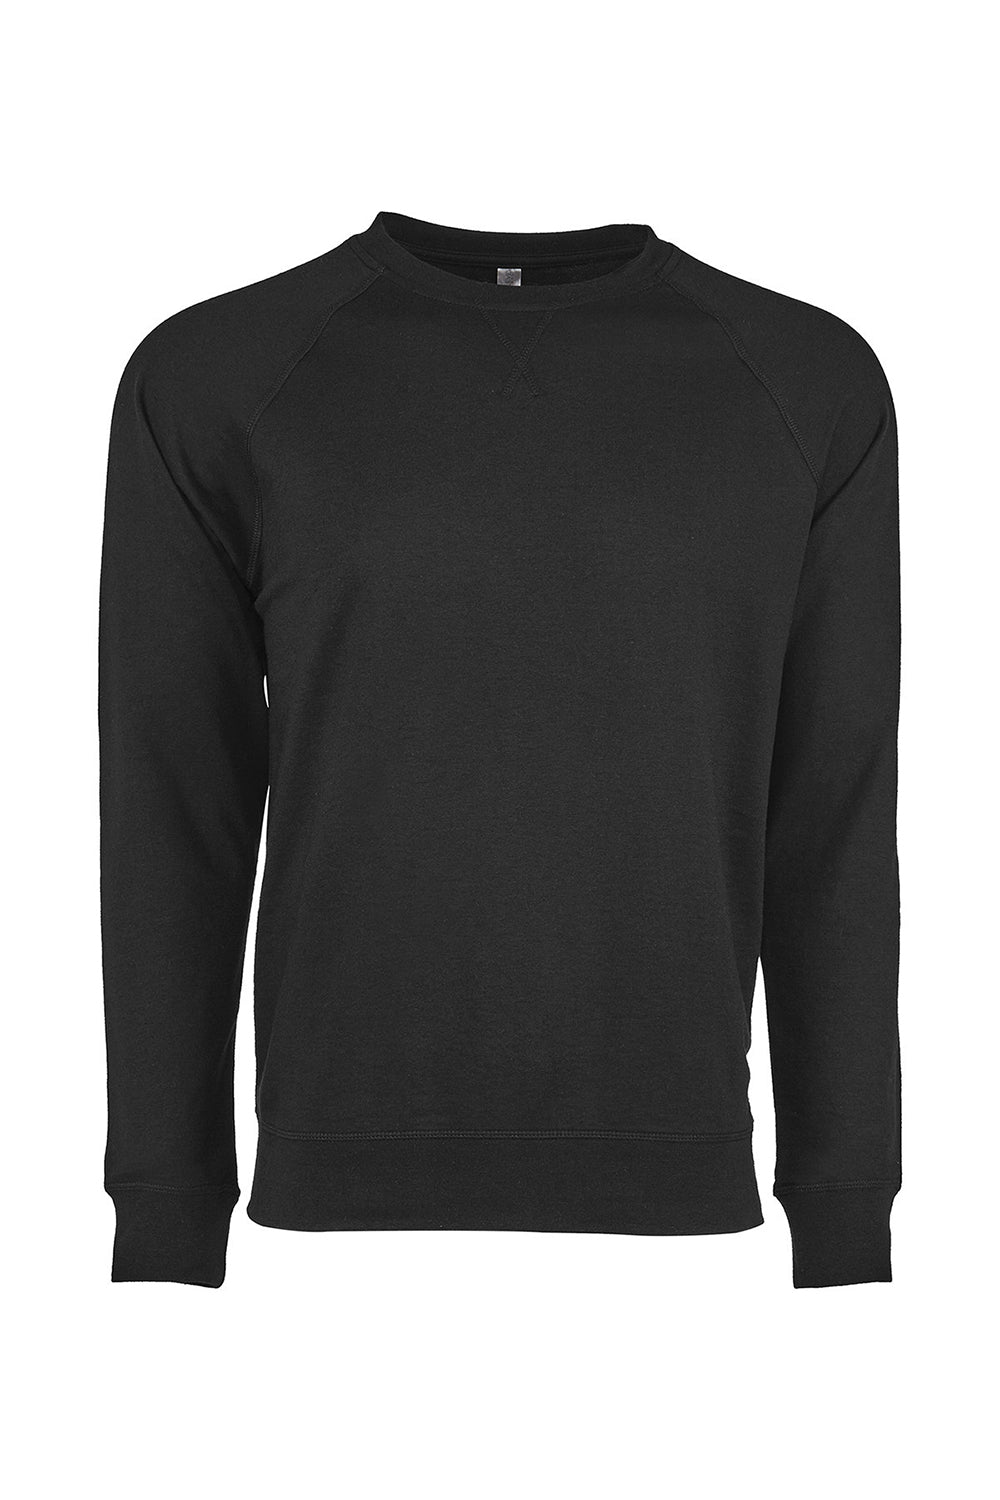 Next Level N9000/9000 Mens French Terry Long Sleeve Crewneck T-Shirt Graphite Black Flat Front